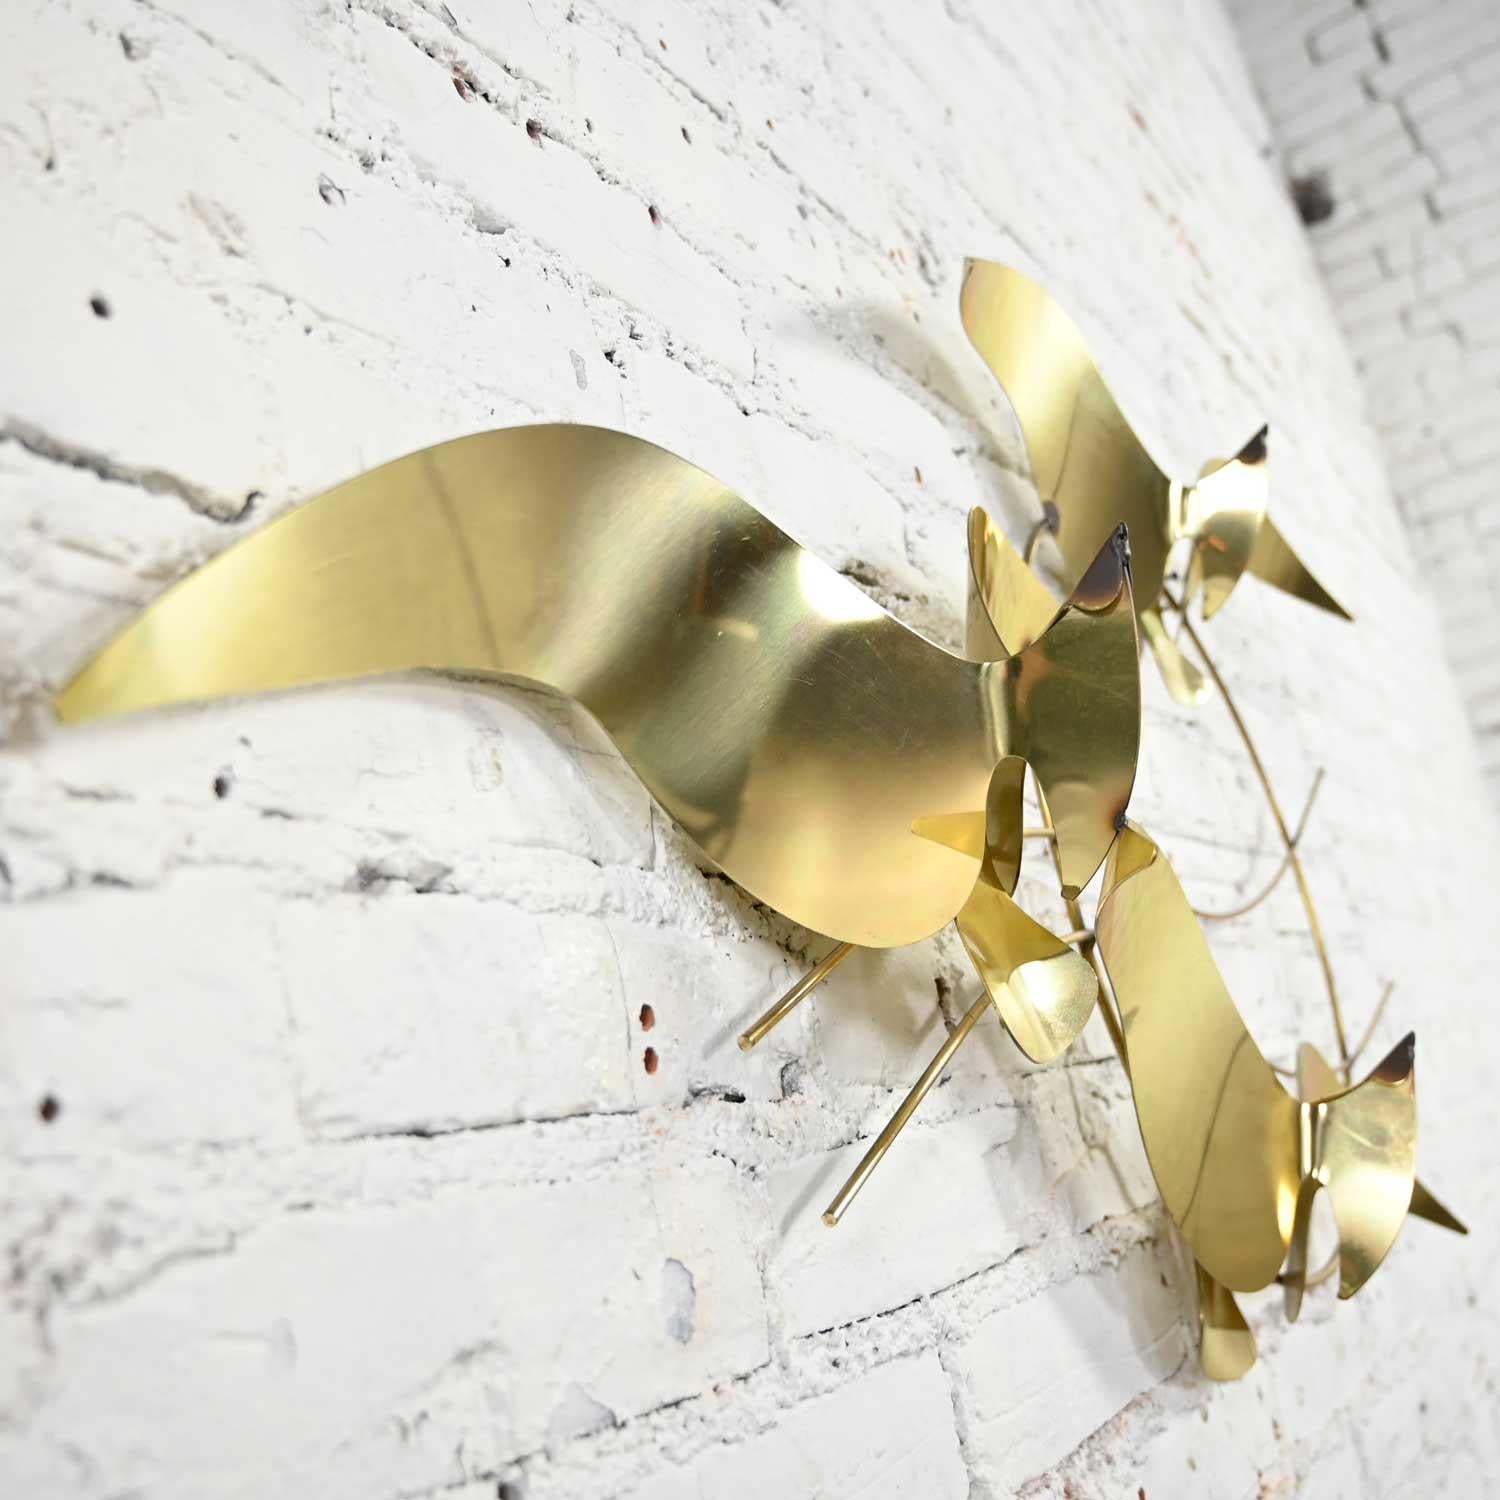 Late 20th Century C Jere Brass Plated Bird Flock of Seagulls Wall Sculpture Signed Dated 1985 For Sale